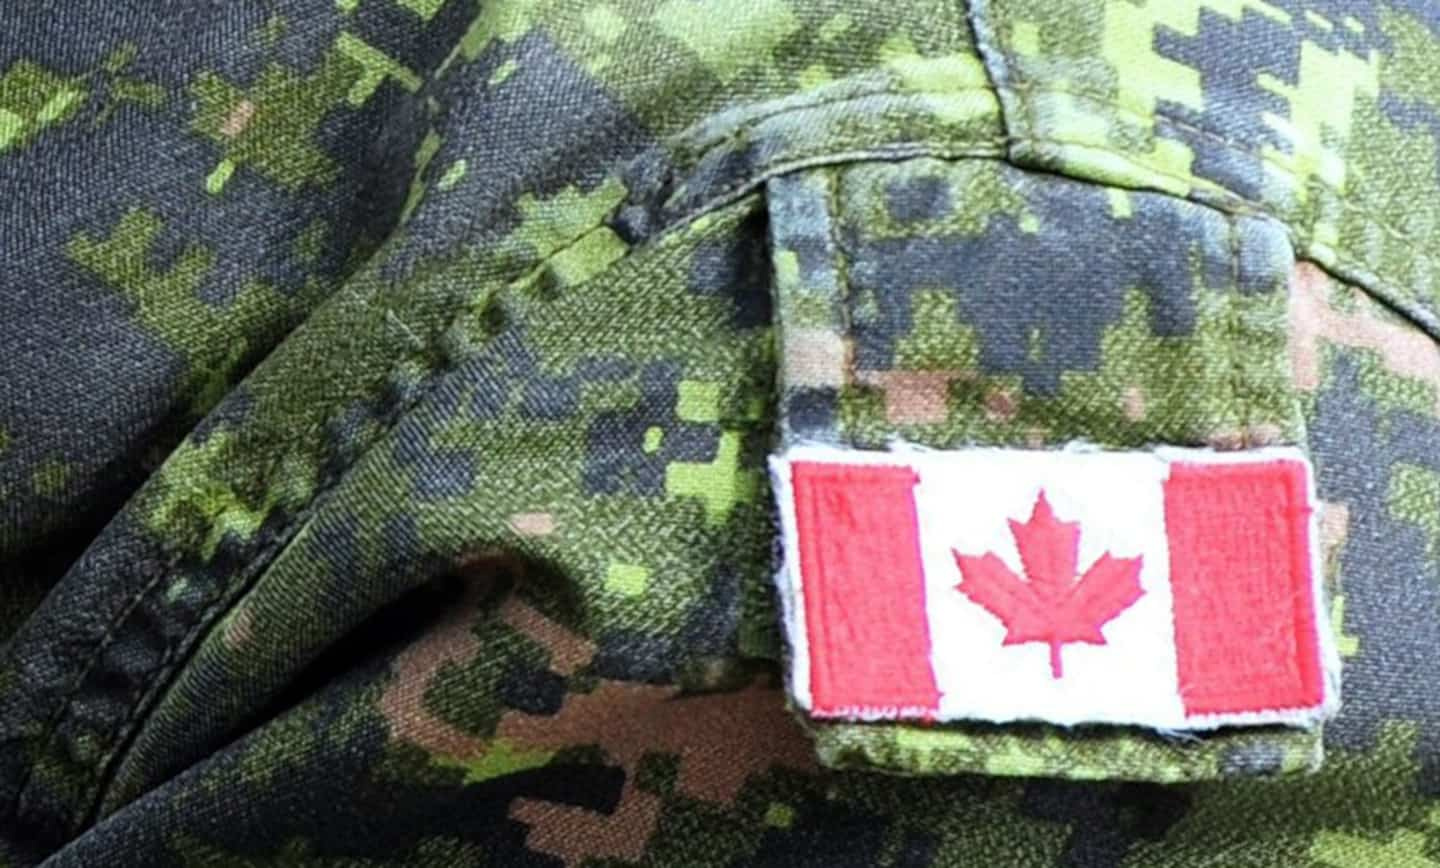 The future of the Canadian Armed Forces hangs in the balance